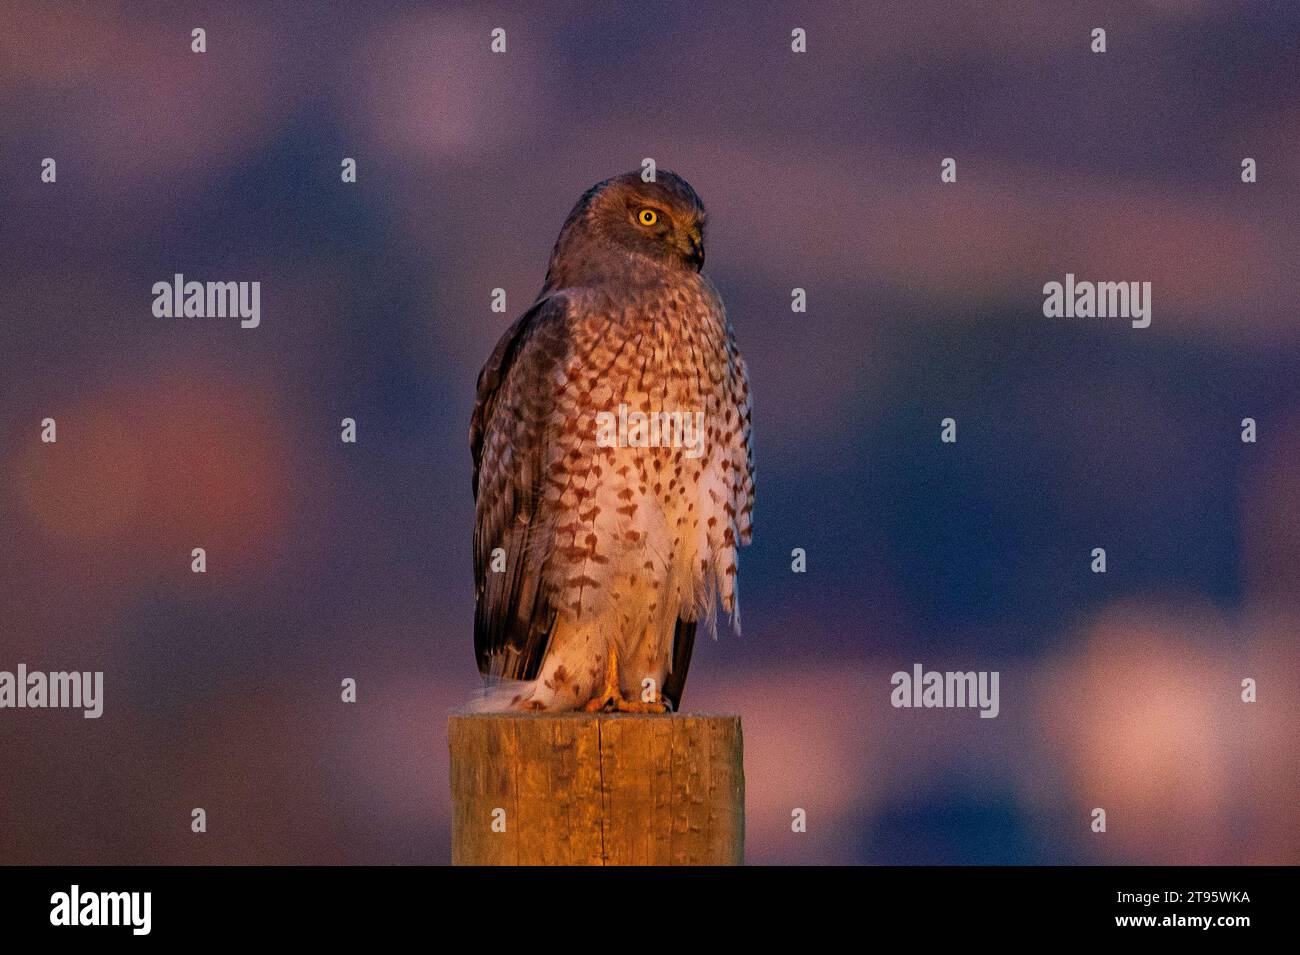 A striking Northern Harrier (Circus cyaneus) stands on a post in the warm light of the setting sun at Farmington Bay Waterfowl Management Area, Utah. Stock Photo